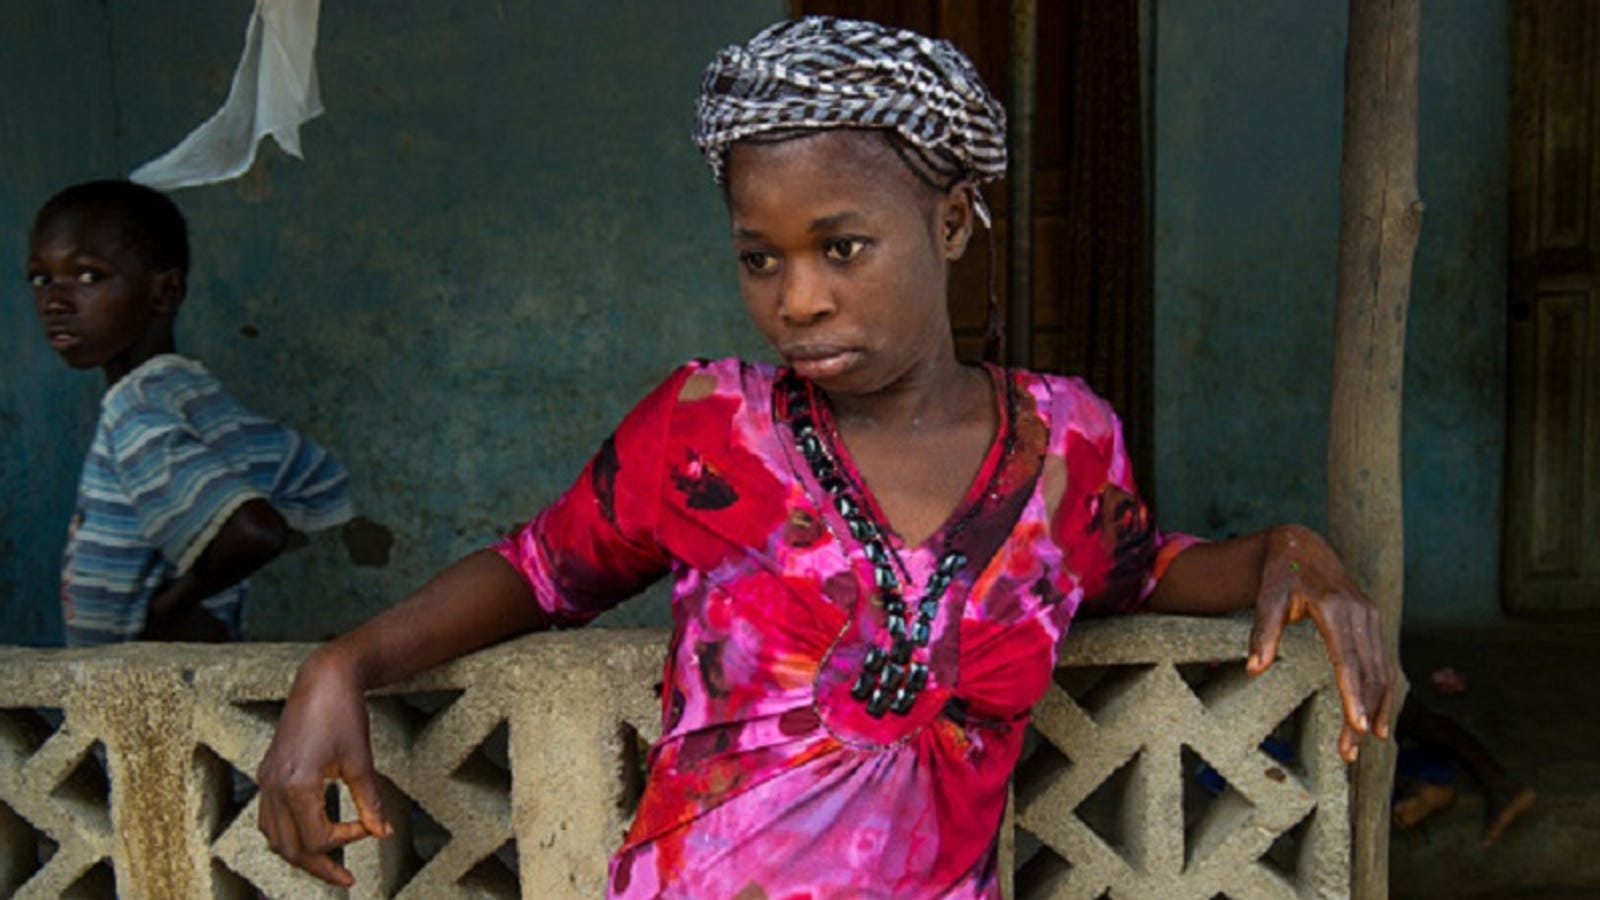 Teen Pregnancy Is Rising In West Africa As An AfterEffect Of The Ebola